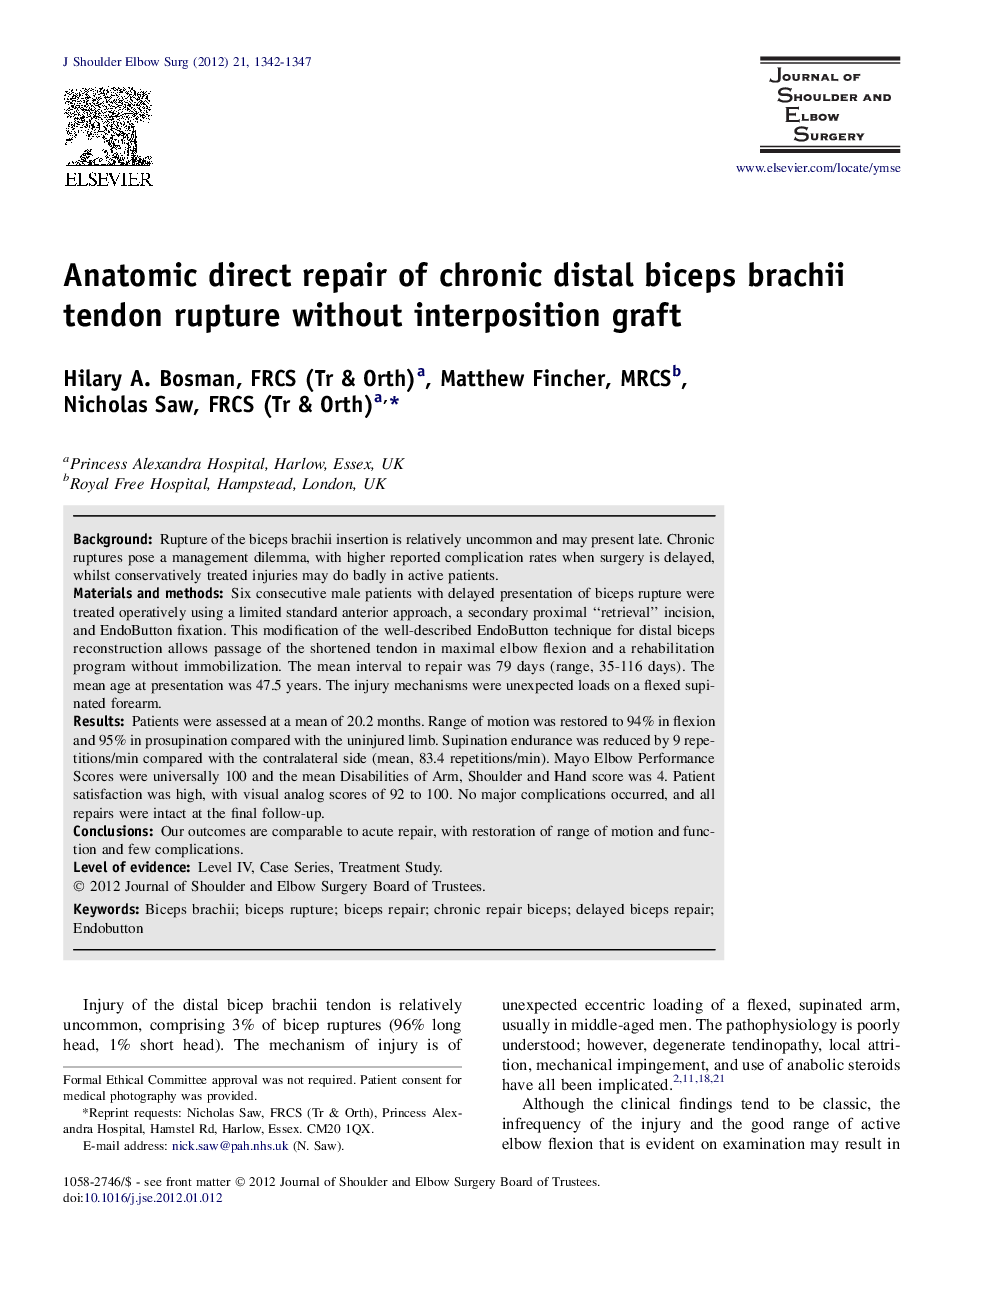 Anatomic direct repair of chronic distal biceps brachii tendon rupture without interposition graft 